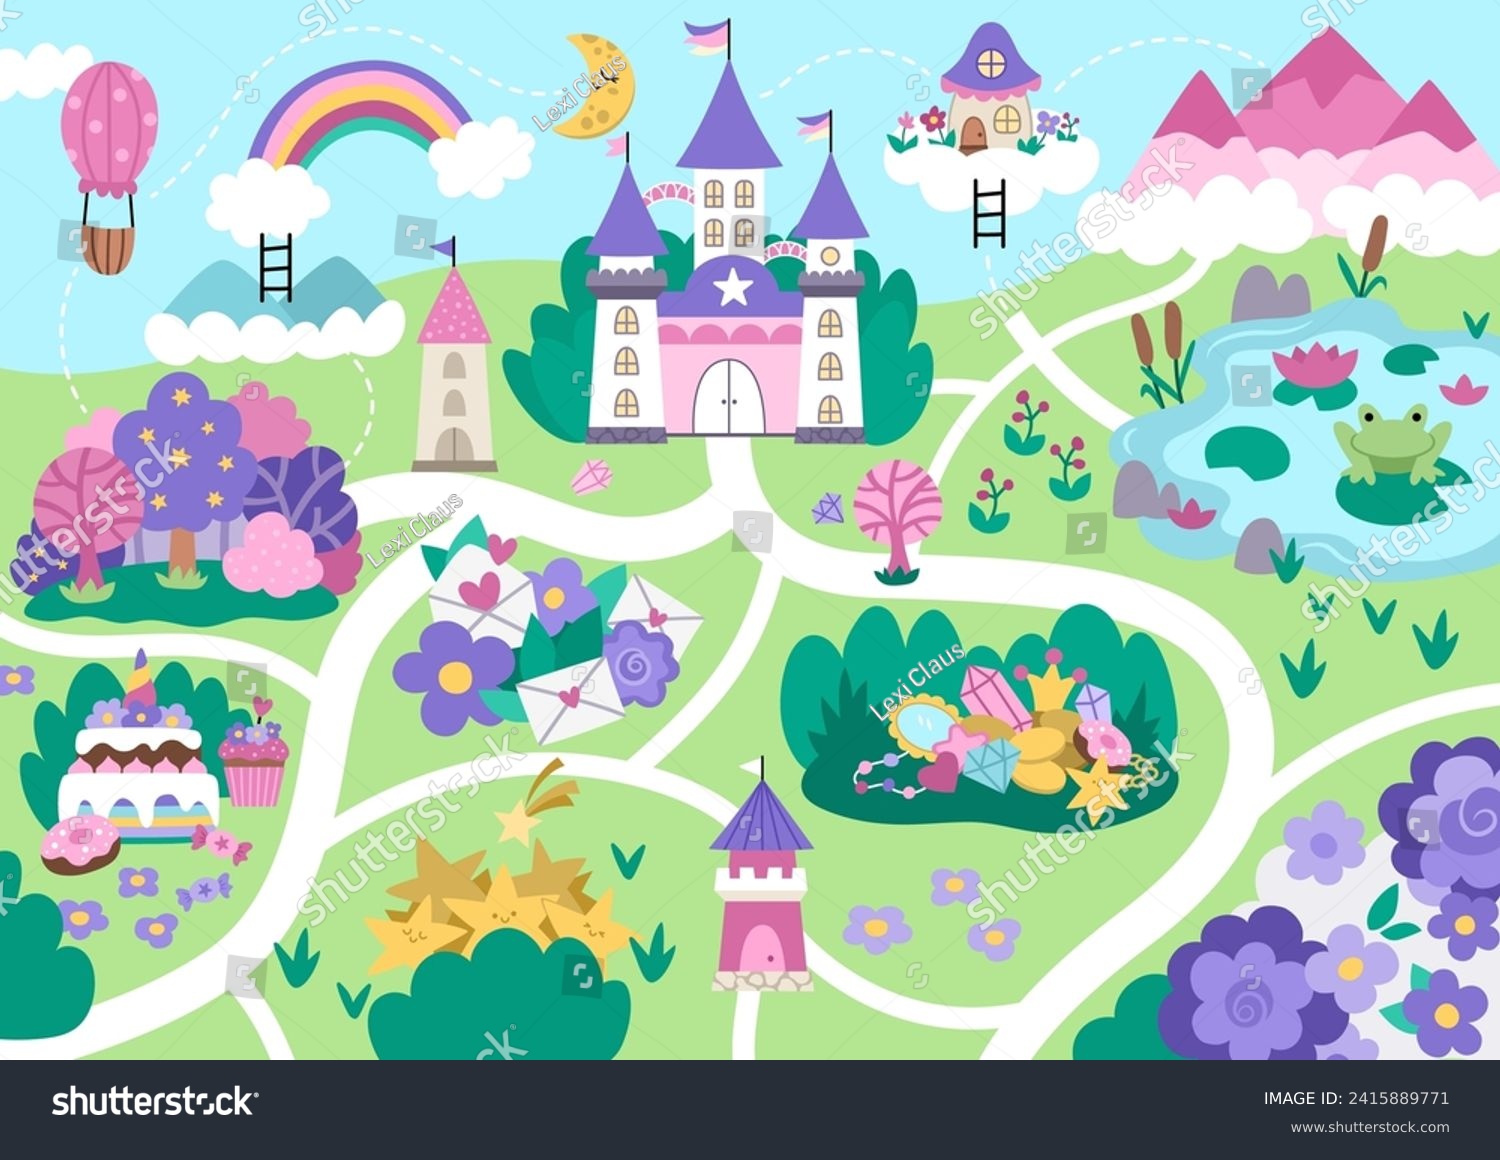 SVG of Unicorn village map. Fairytale background. Vector magic country scenes infographic elements with castle, rainbow, forest, pond, road. Fantasy world plan with fallen stars, treasures, sweets
 svg